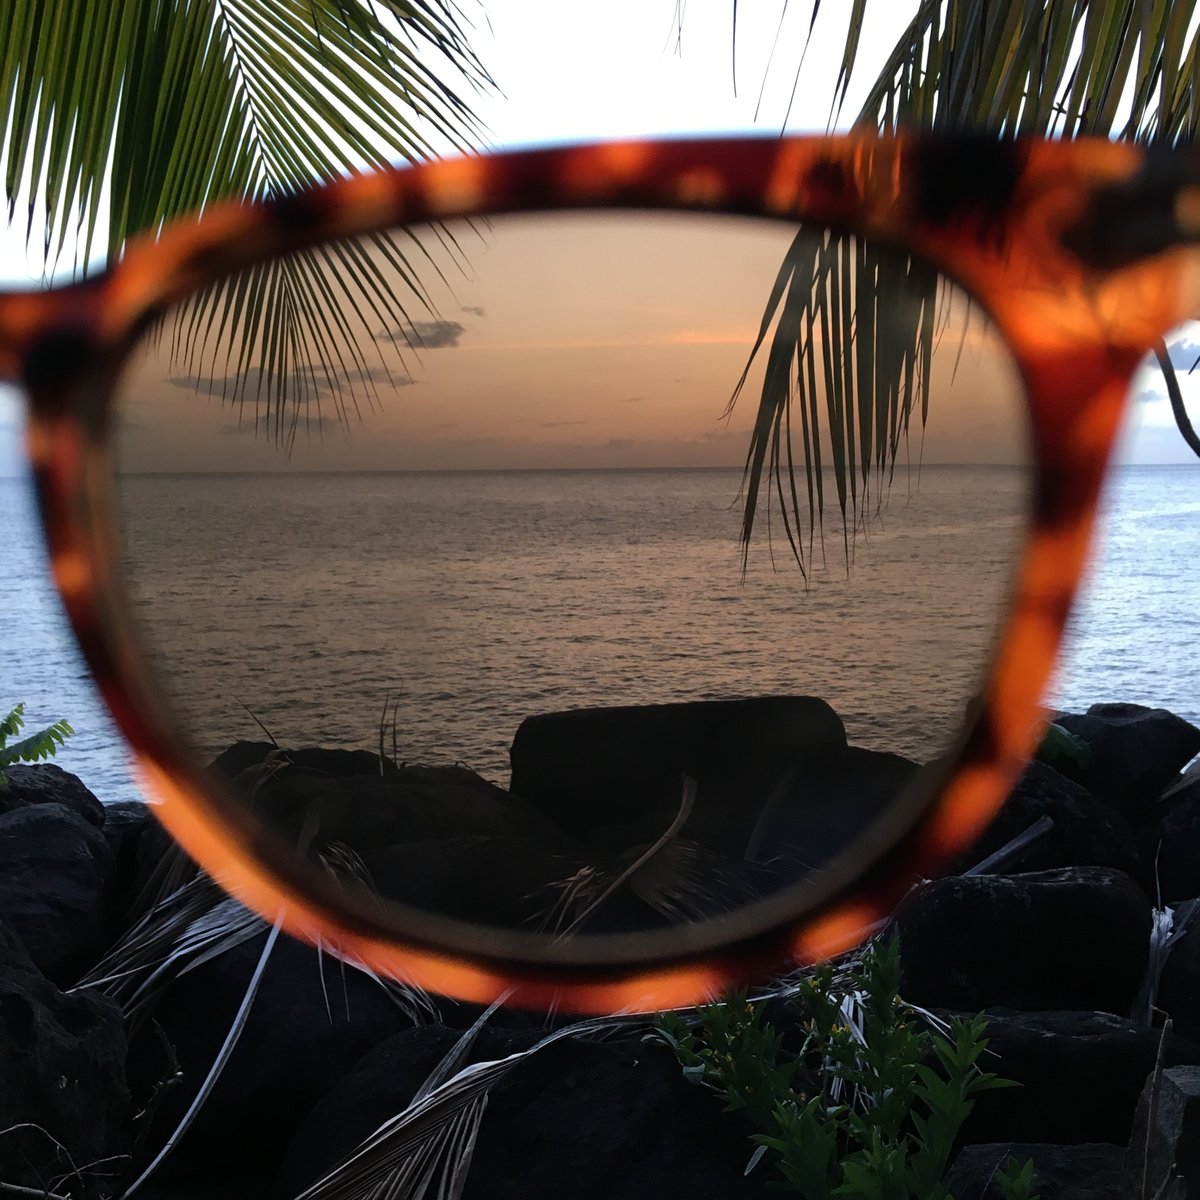 #MondayMood: the need for vitamin sea 🌊 is very easy to see 🕶. 

Make your Monday a little better by planning for the day you get to relax in your shades and listen to the sound of the waves. 😎

Visit flySBN.com to get started! 

#WhereToNext? 🤔 #GetThereWithSBN